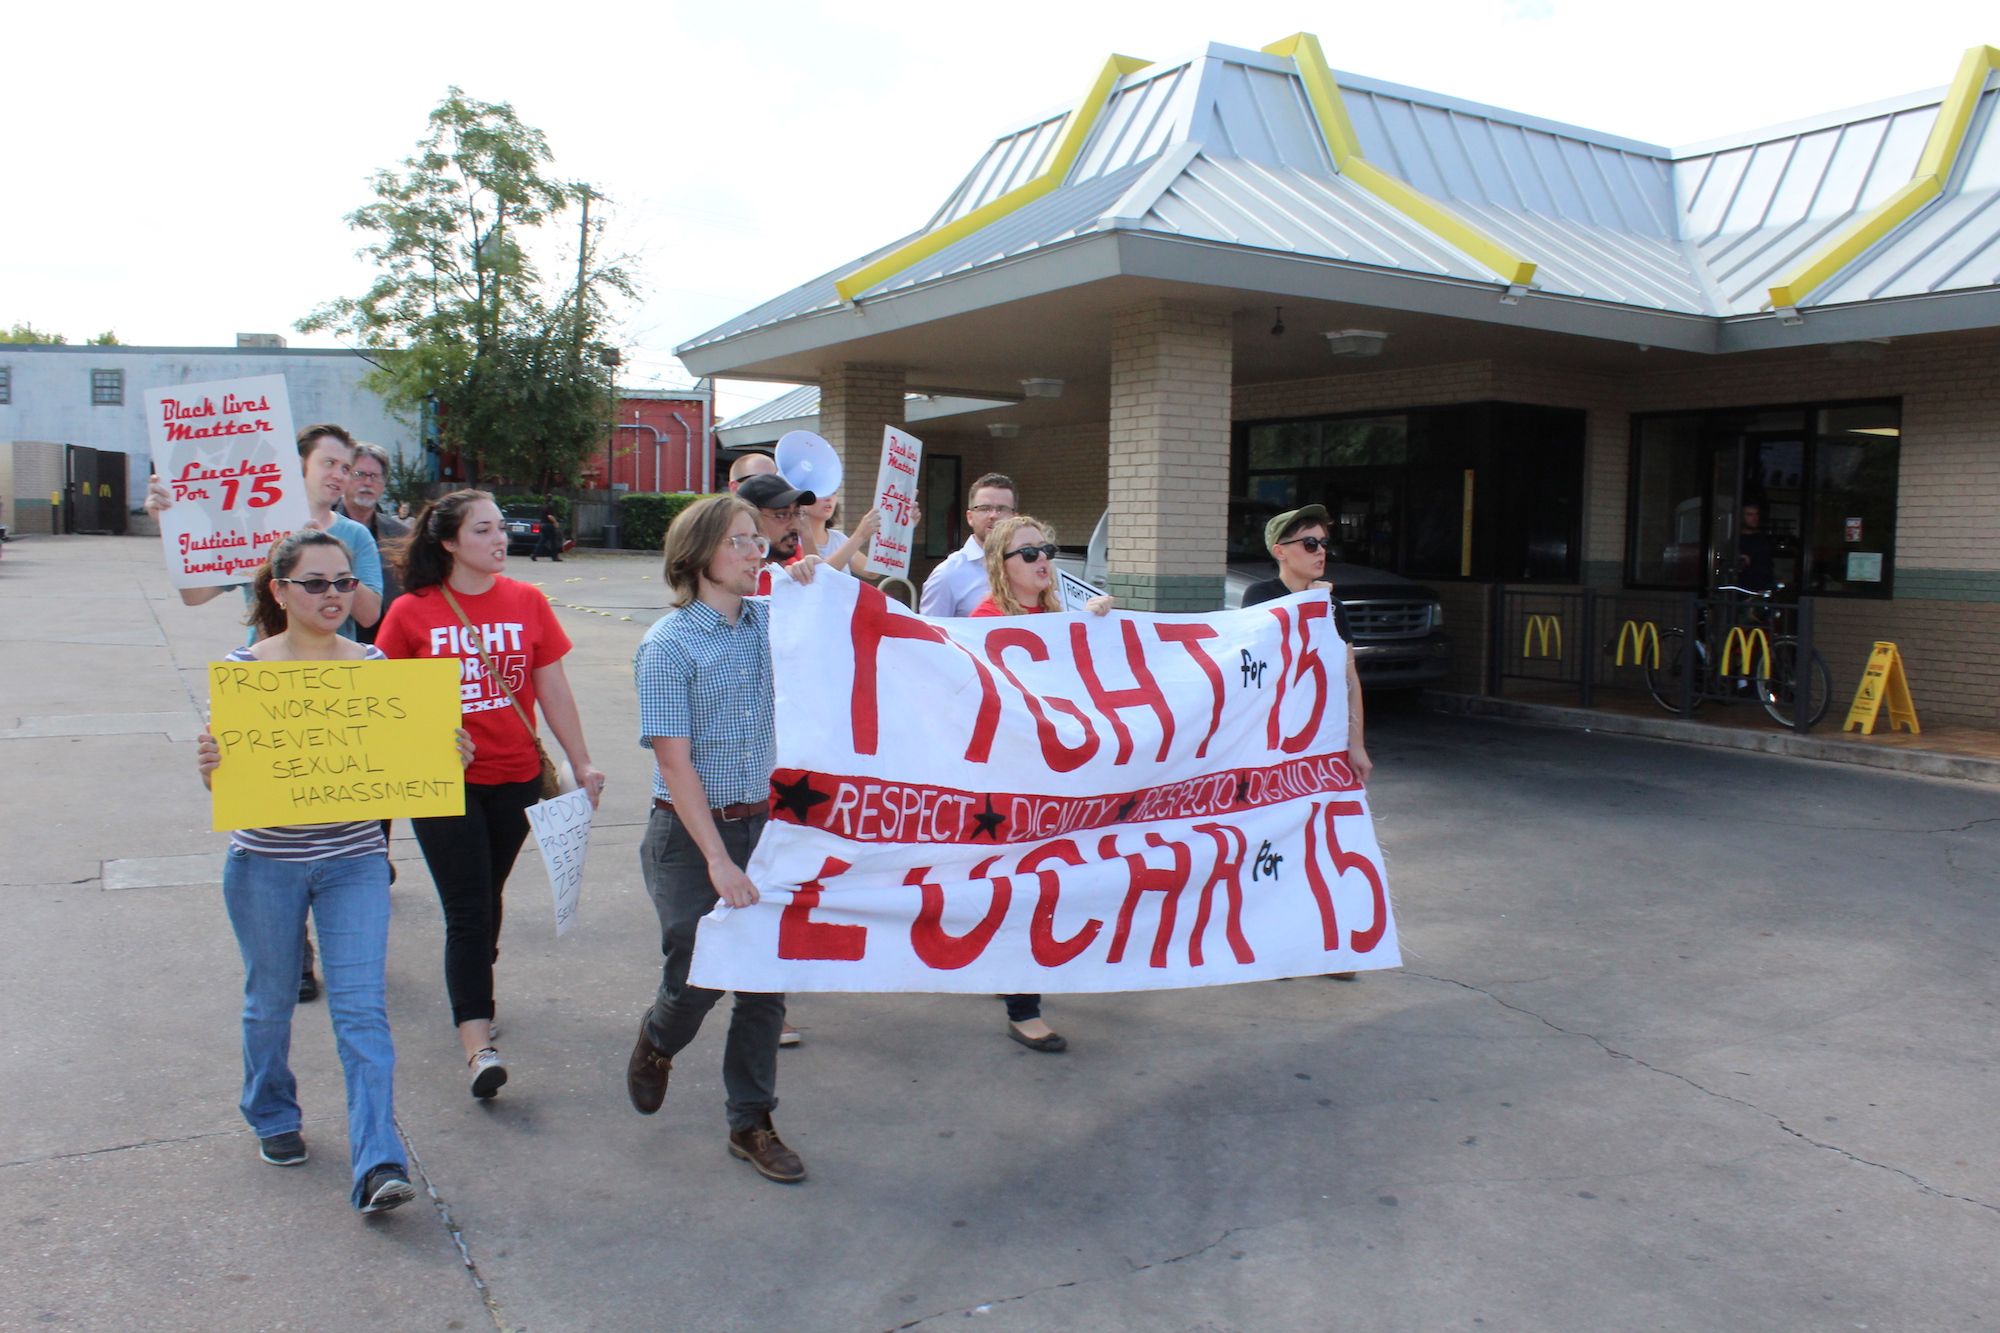 Labor rights demonstrators protest sexual harassment in the fast food industry at an Austin McDonald's. A new survey has found that 40 percent of women fast-food workers report being sexually harassed on the job.